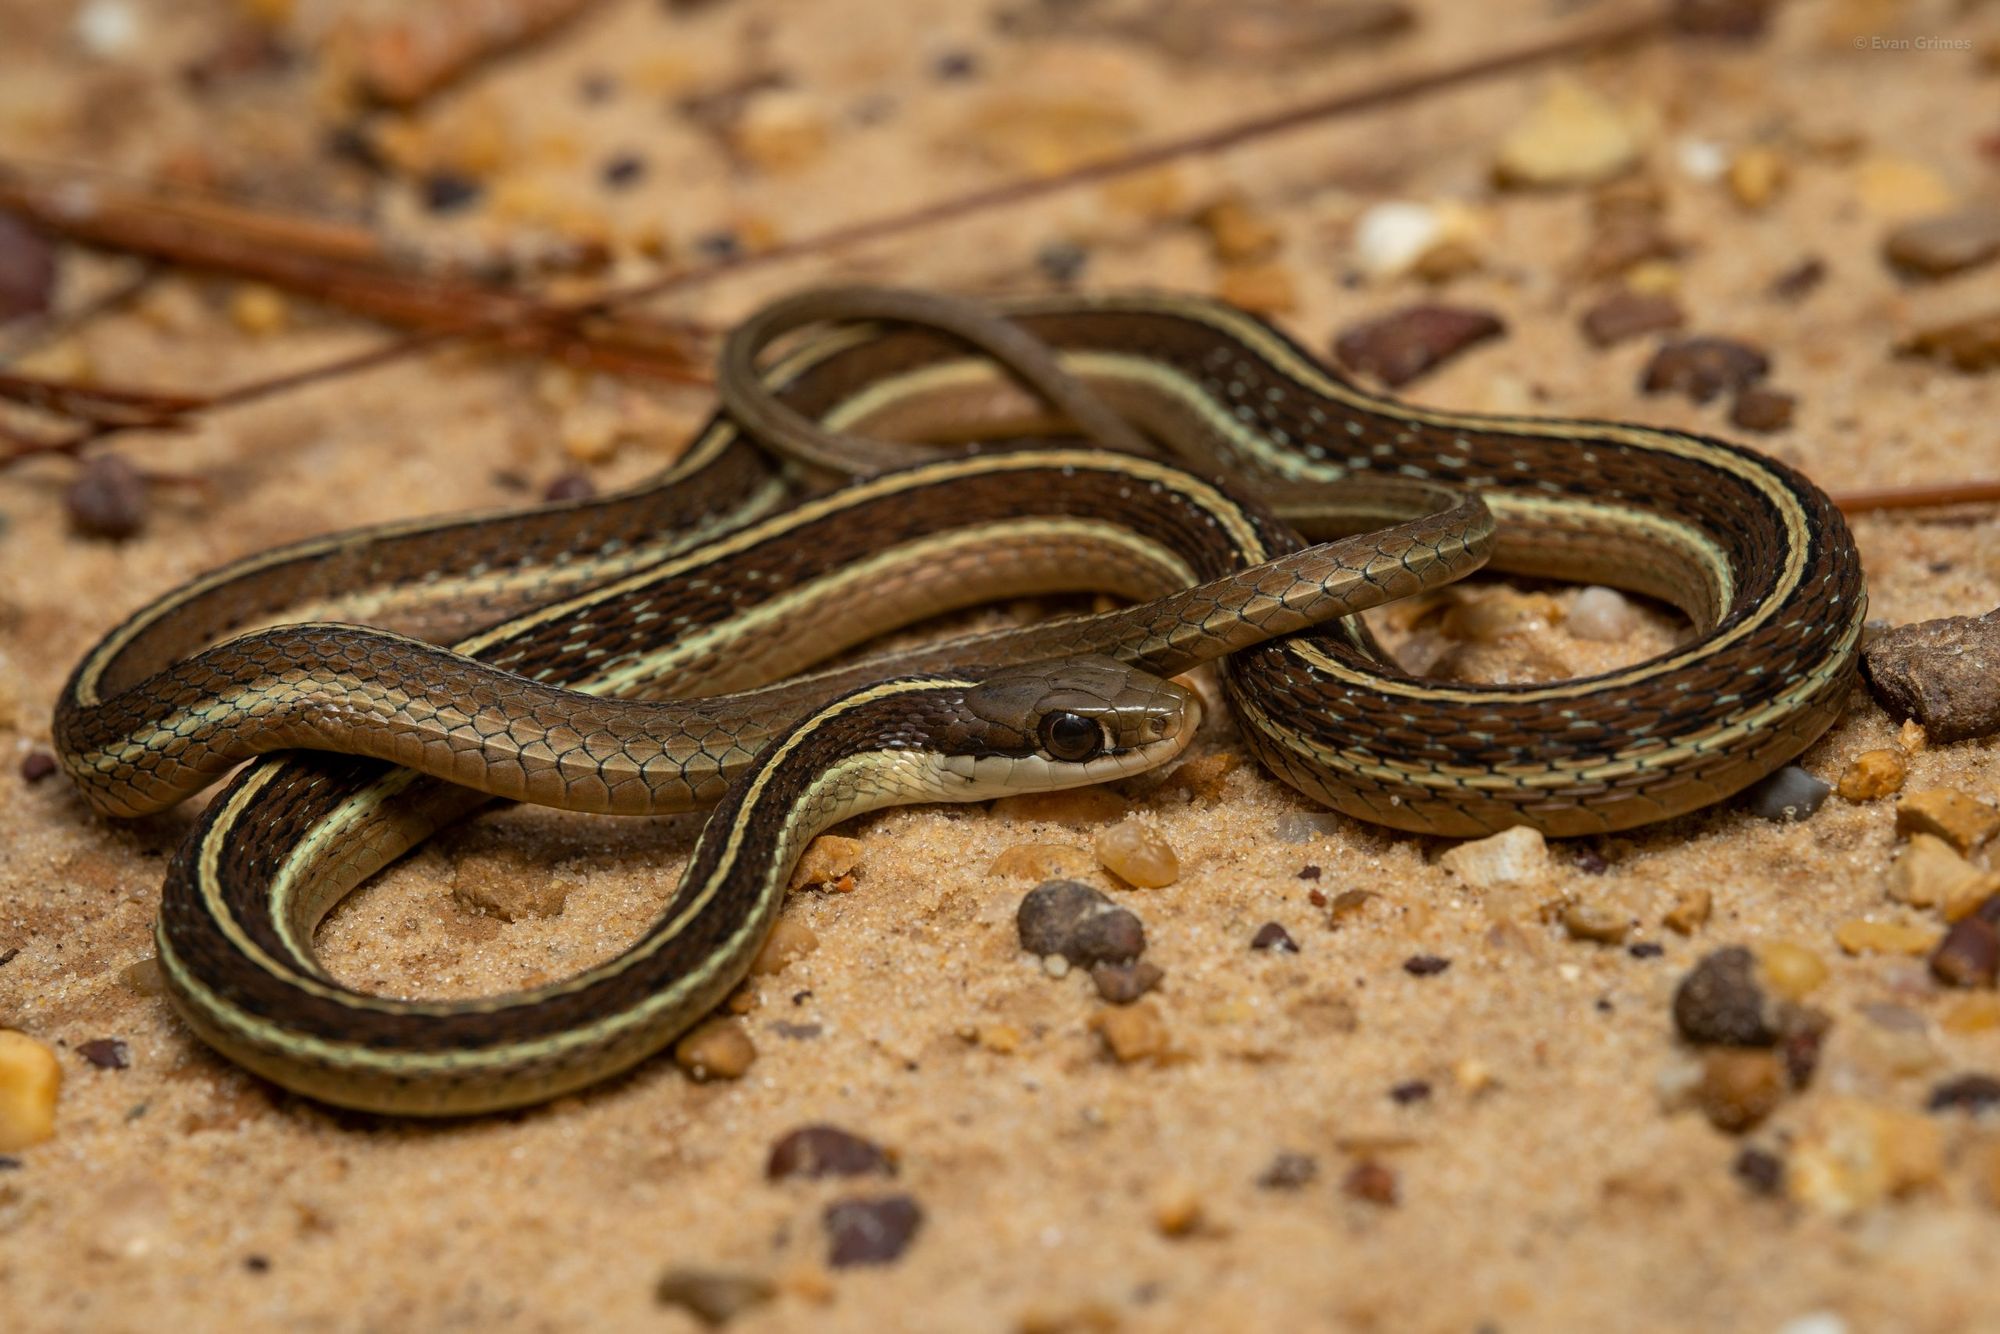 A black snake with yellow stripes lies coiled in sand.